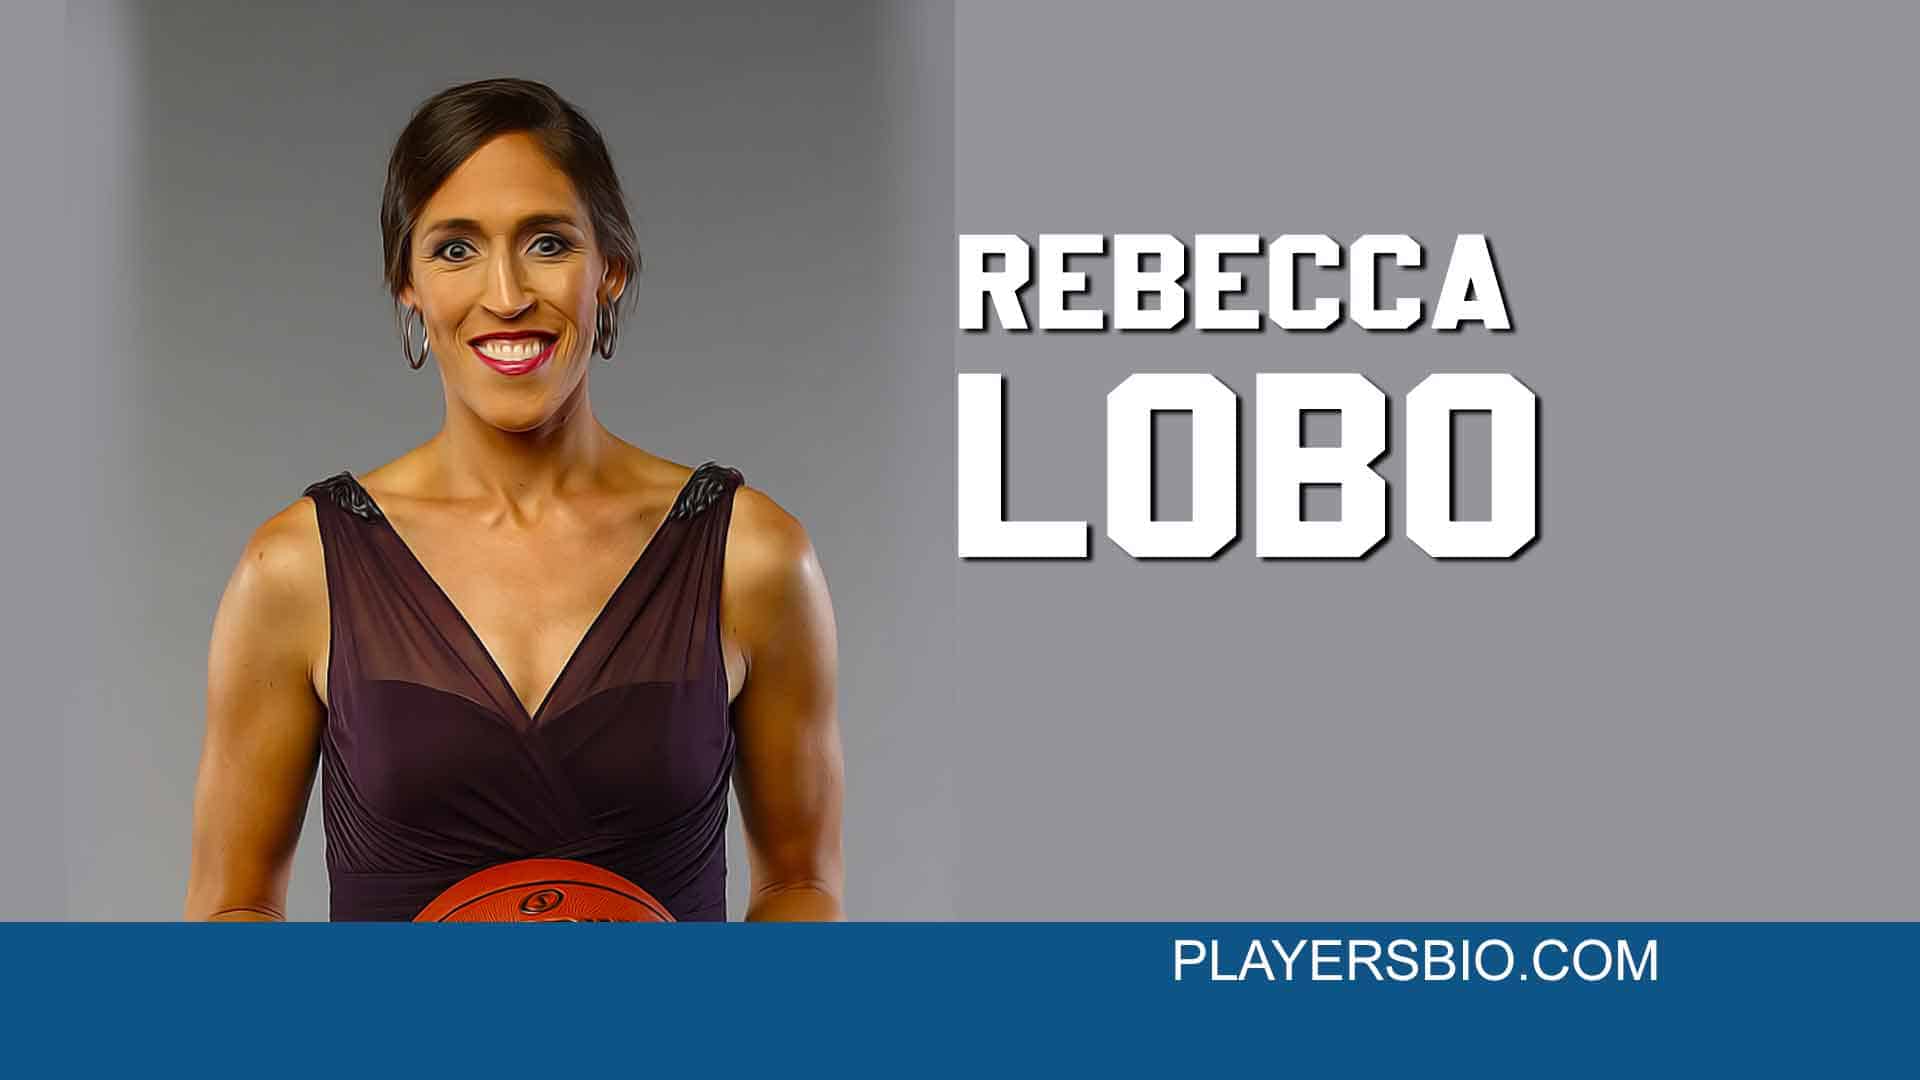 Rebecca Lobo is a 47 years old ESPN sports reporter.The hall of famer is ma...